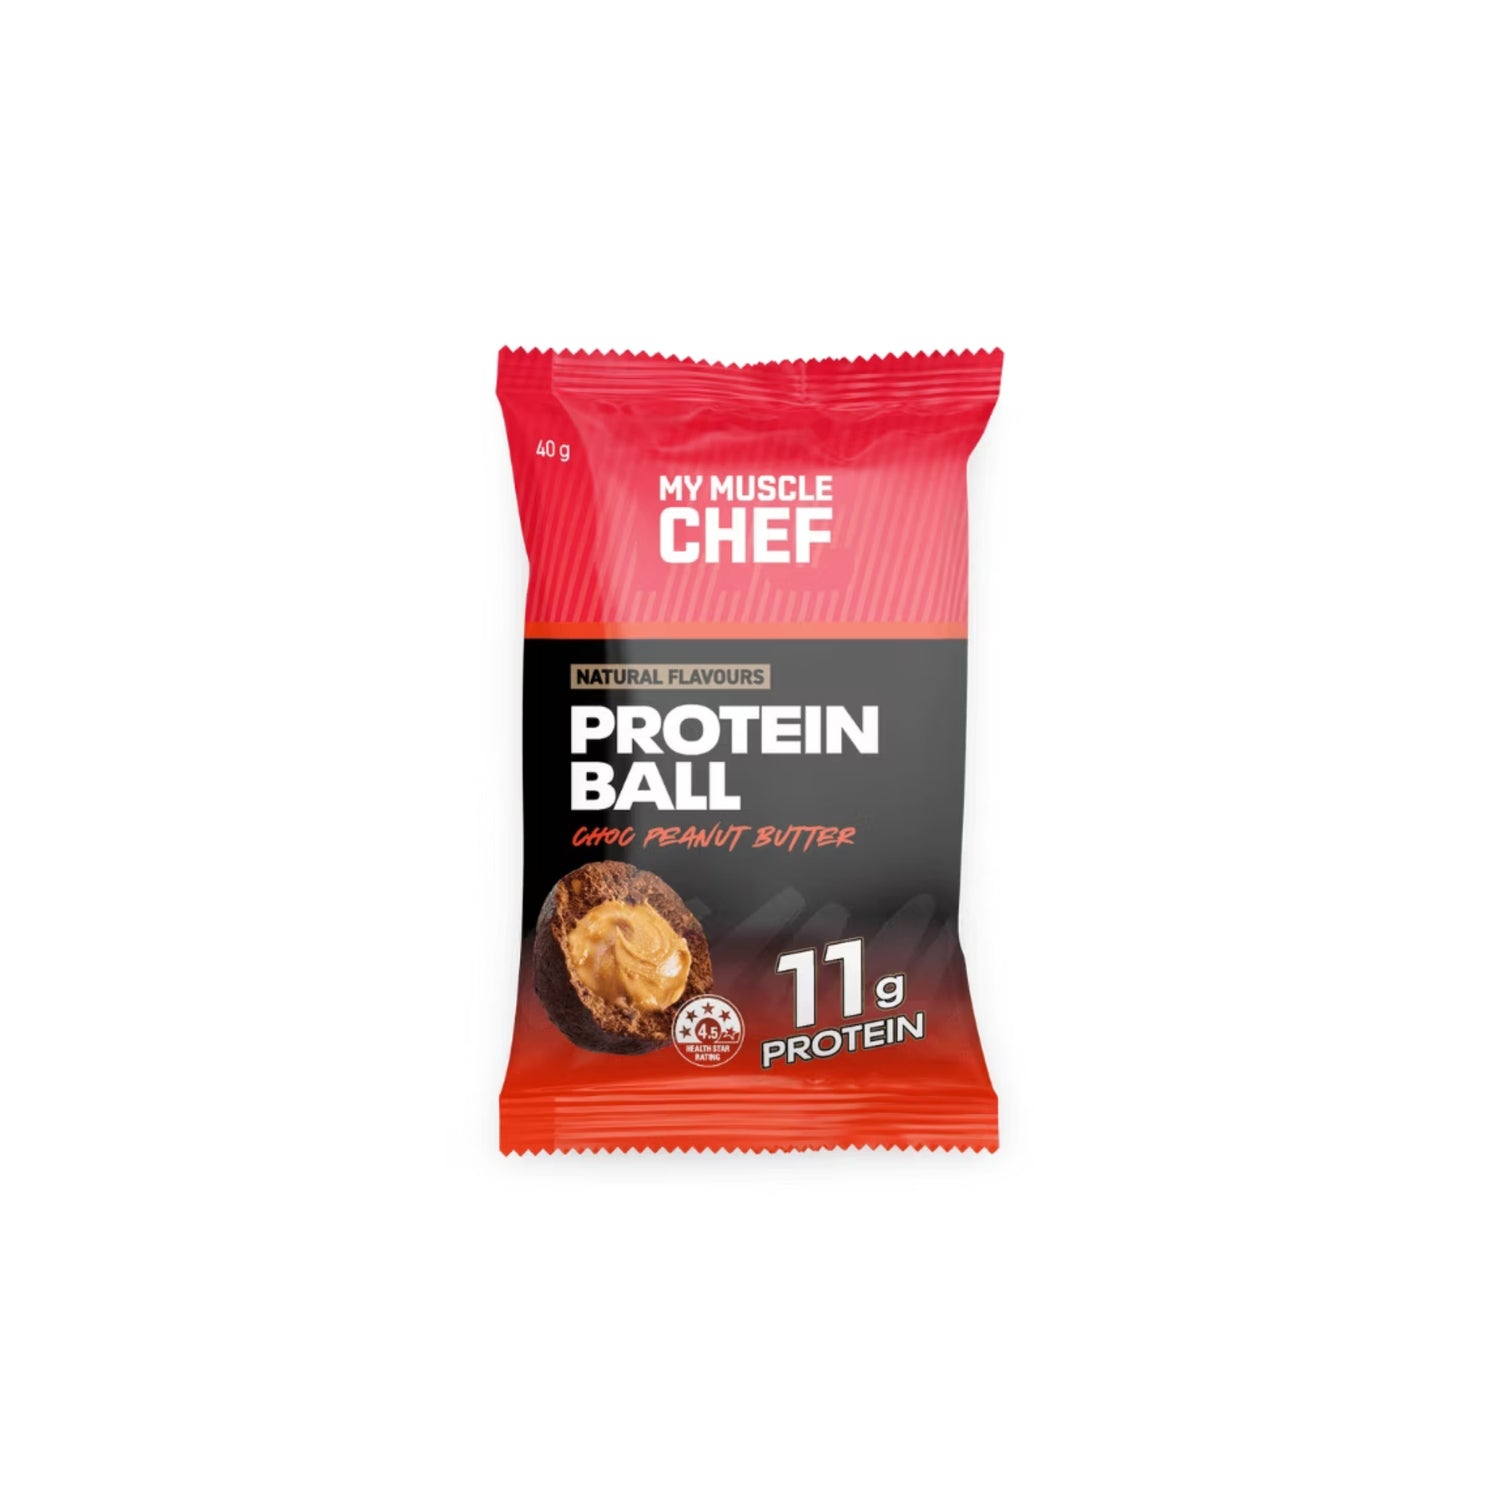 My Muscle Chef Protein Ball - Choc Peanut Butter